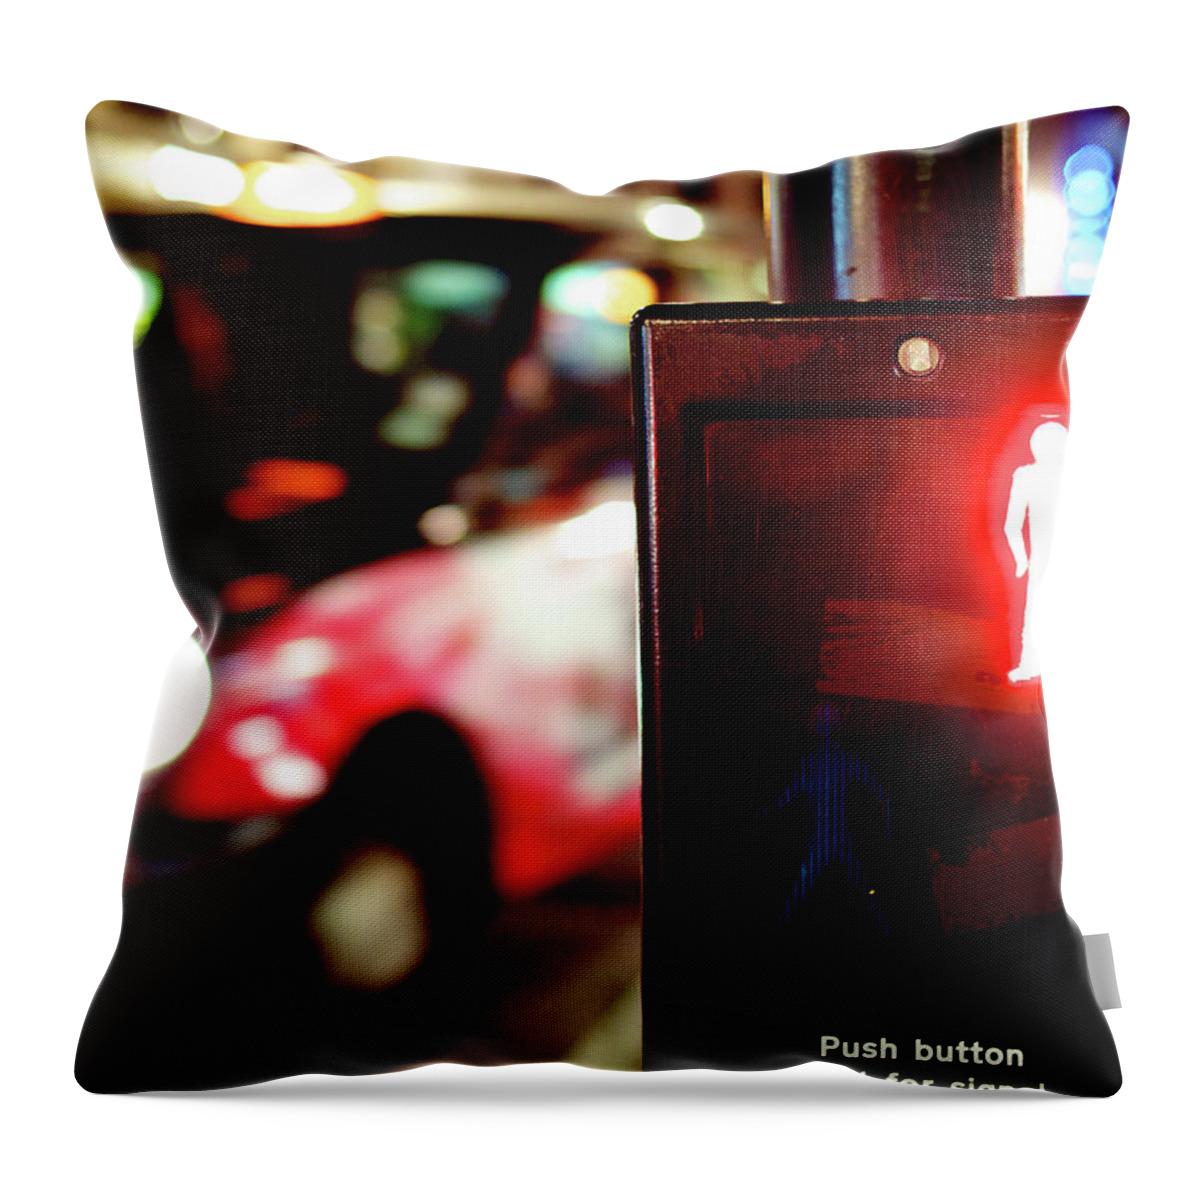 Outdoors Throw Pillow featuring the photograph Push Button Wait For Signal by Image By Tobias Weisserth - Www.friendlyimitationofwork.com